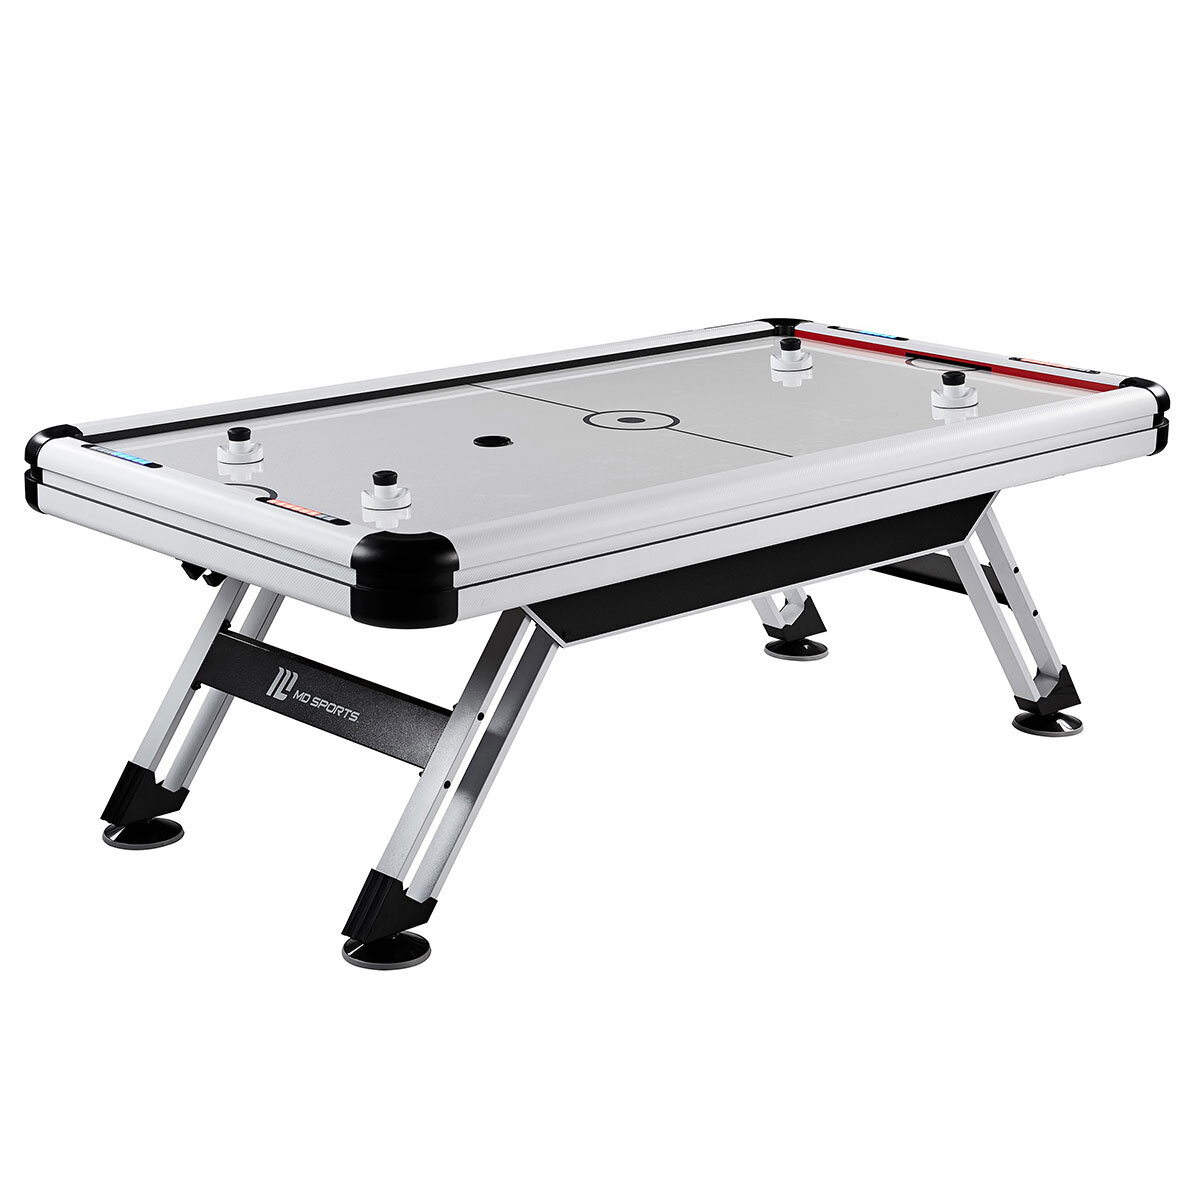 Lead image for Medal Sports Air Hockey Table